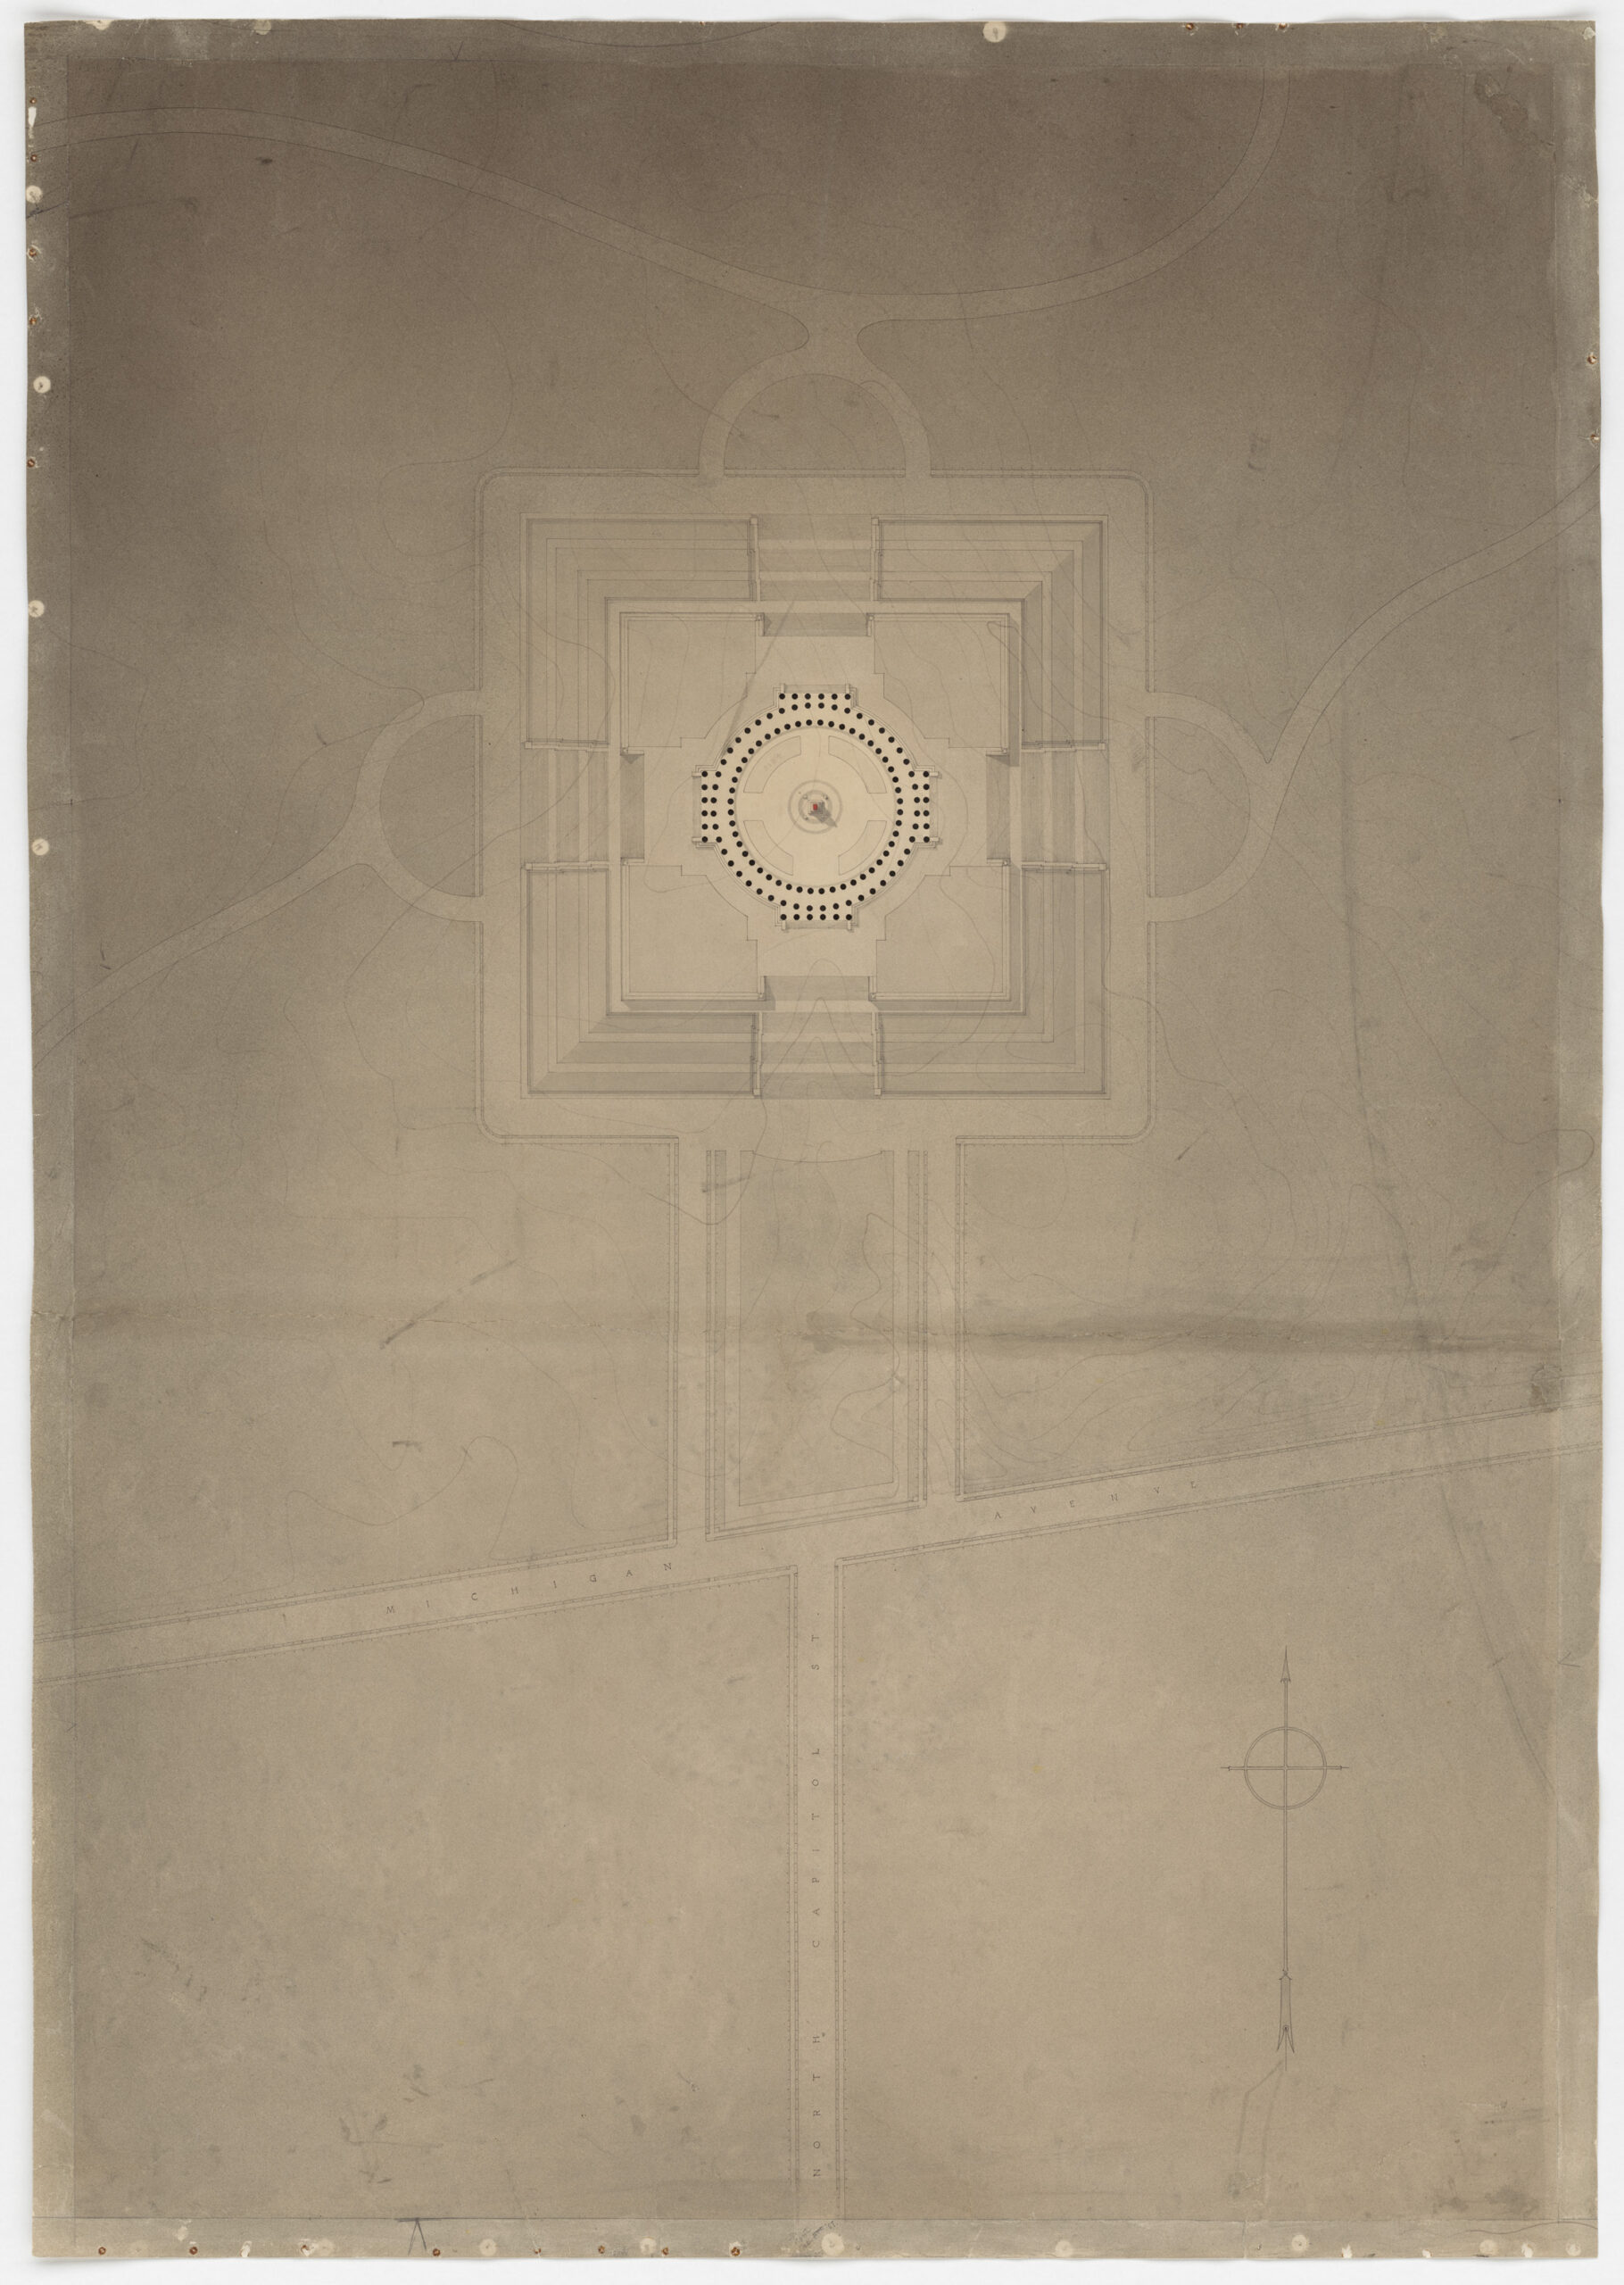 Monument to Abraham Lincoln at the Soldier's Home Site, Ground Plan